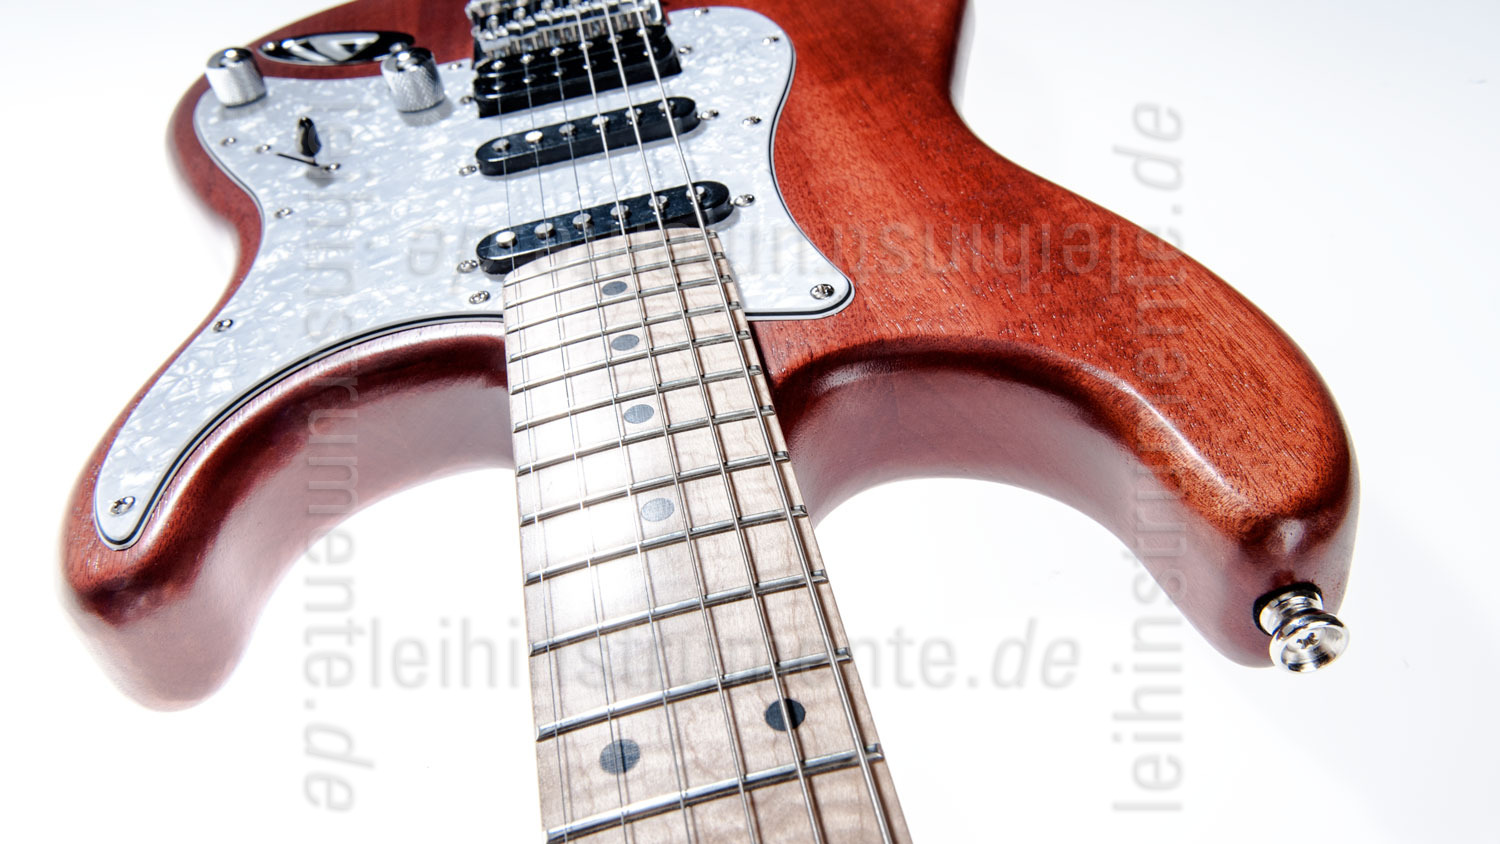 to article description / price Electric Guitar BERSTECHER New Whisky + hard case - made in Germany